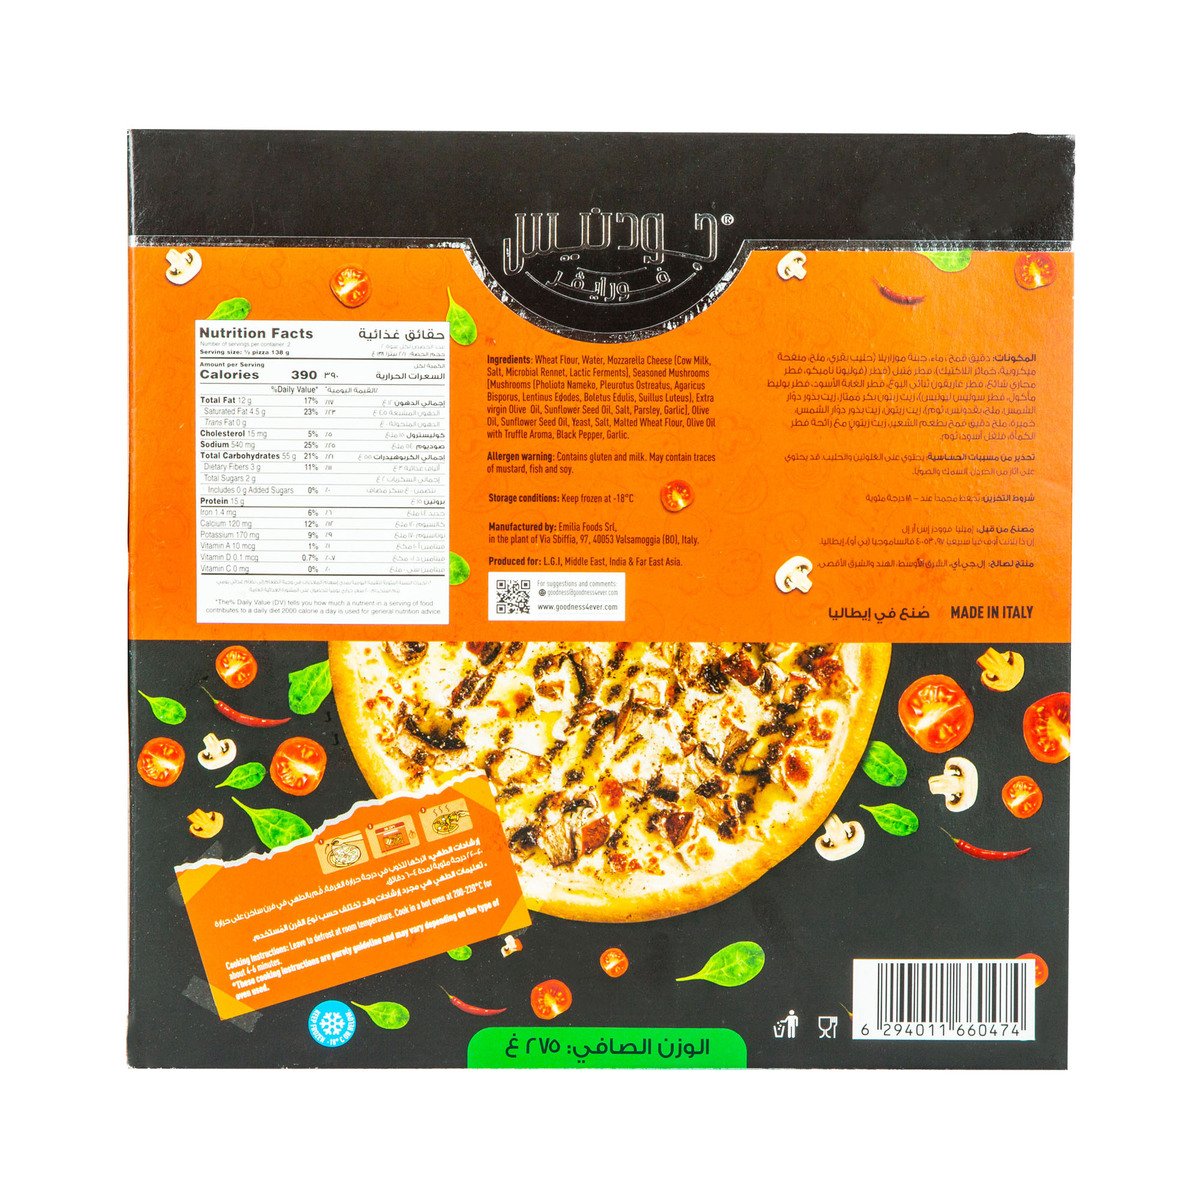 Goodness Forever Pizza with Truffle Mushrooms 275 g